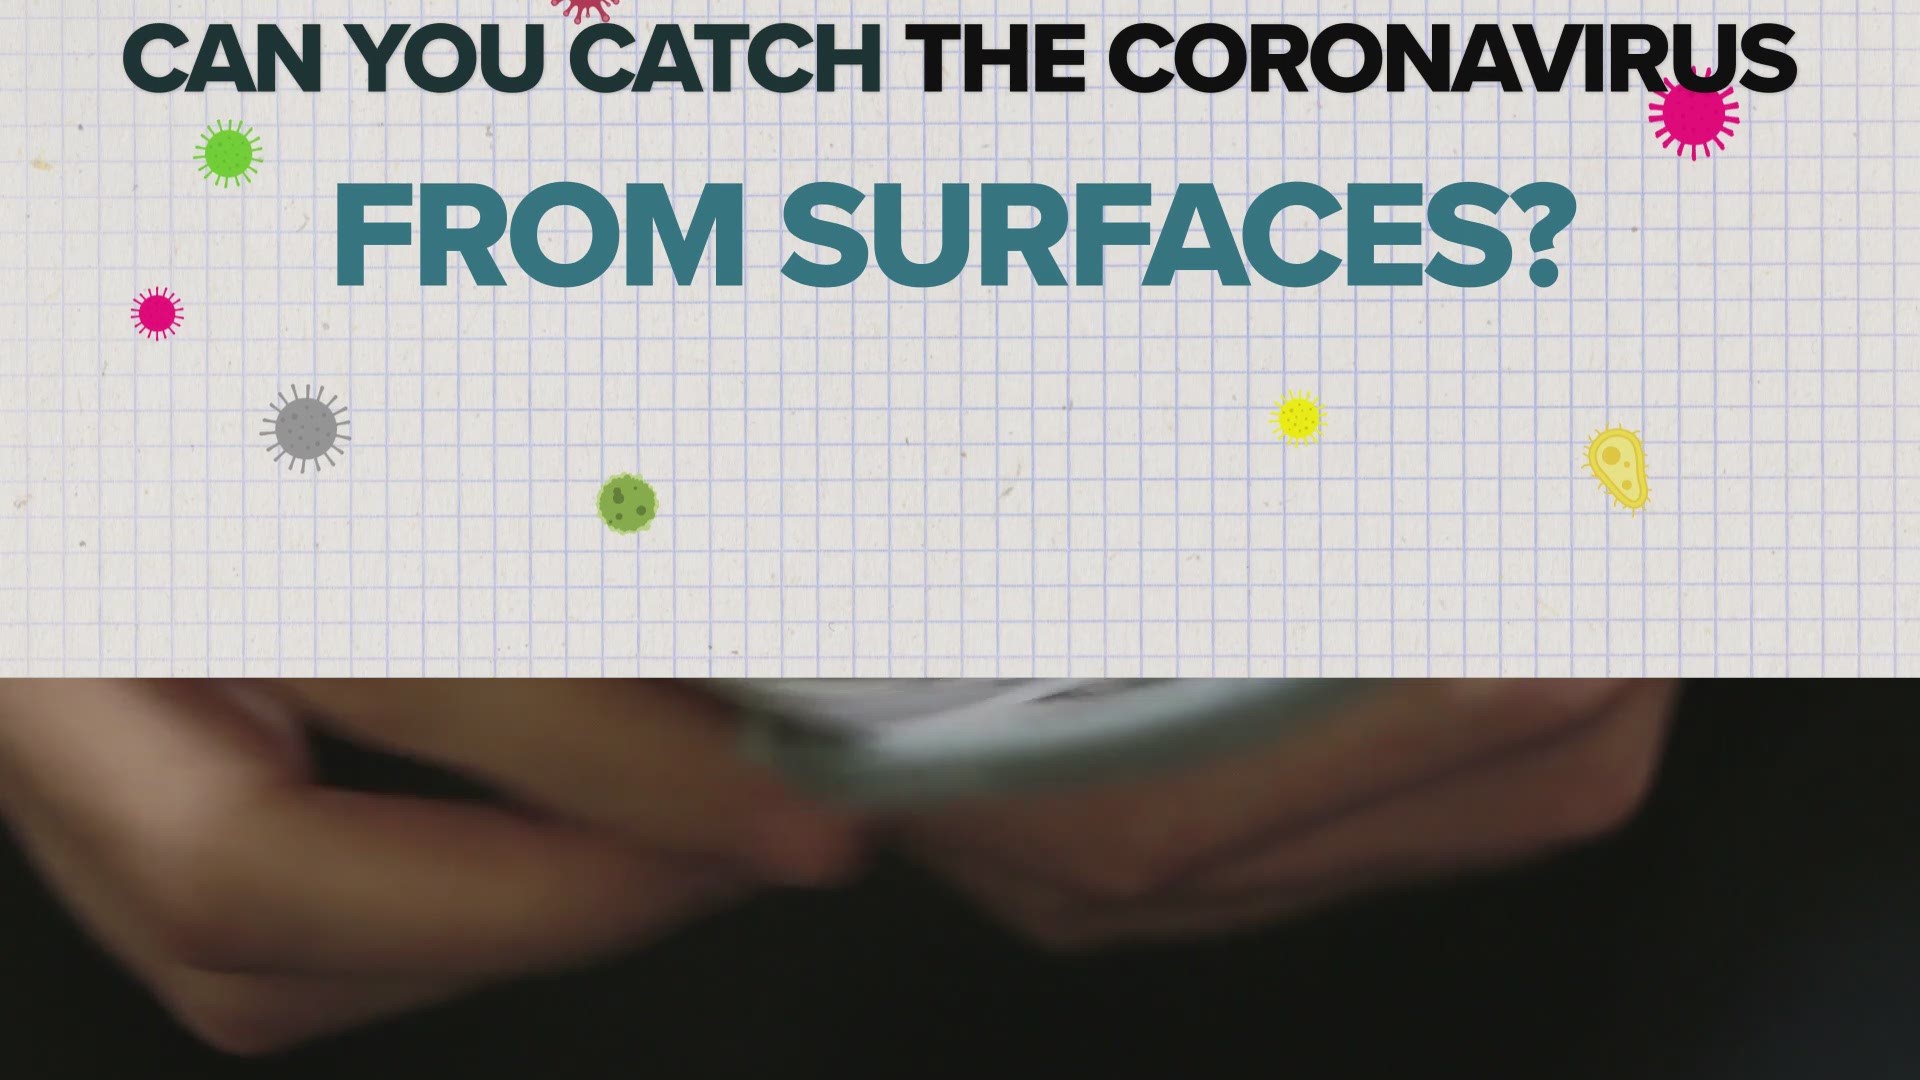 How long can the coronavirus last on objects? Can you get sick from touching something that carries the virus? Here's what we know about the virus and surfaces.